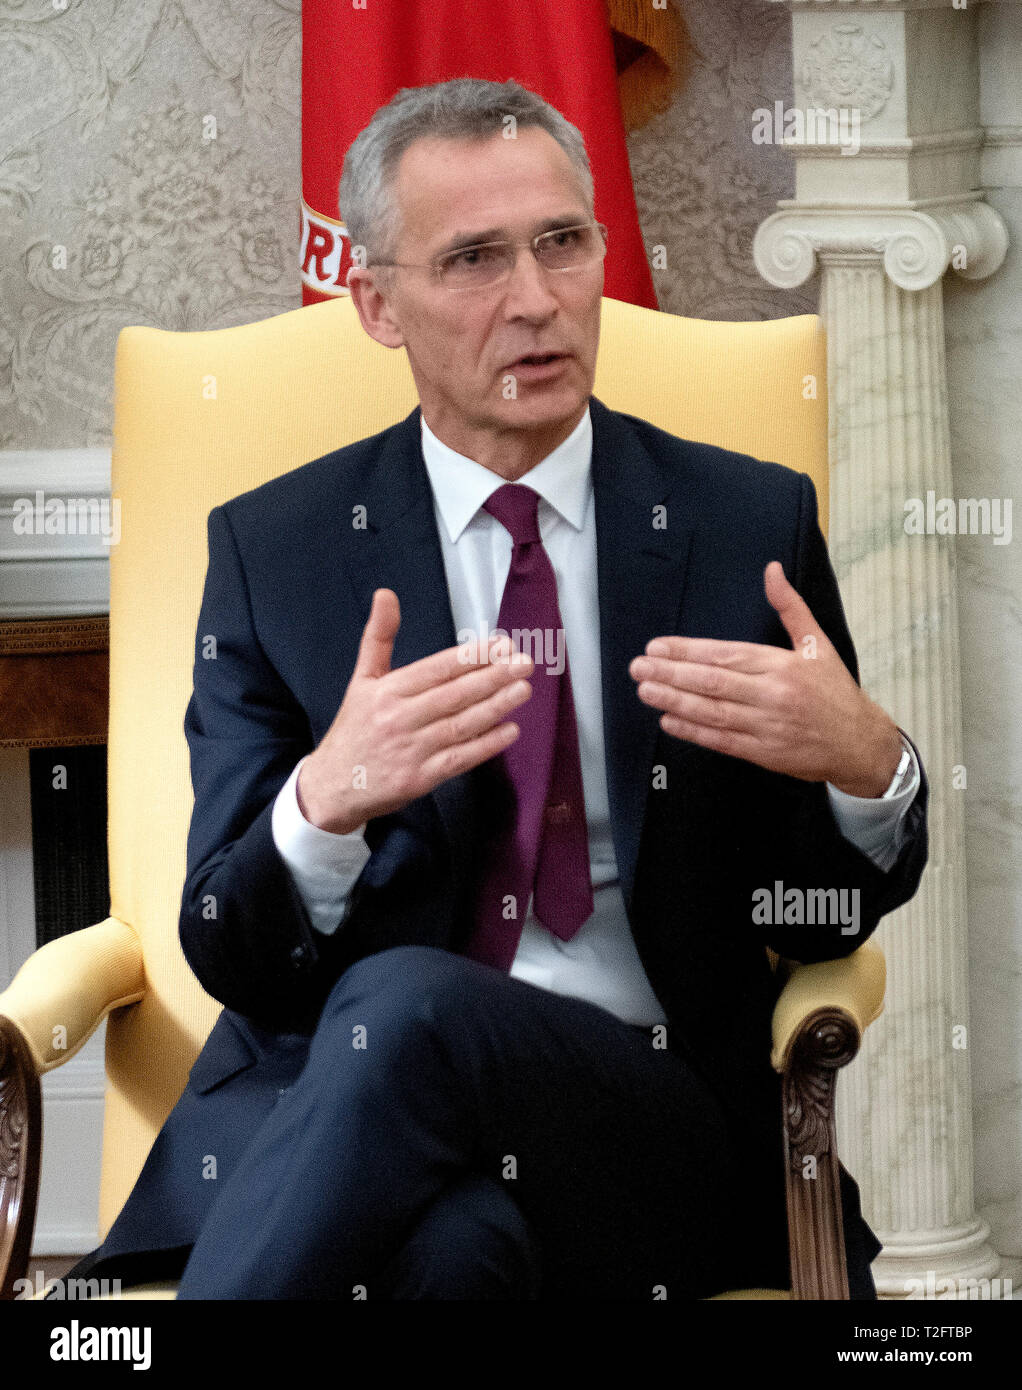 Washington DC, USA. 02nd Apr, 2019. Jens Stoltenberg, Secretary General of the North Atlantic Treaty Organization (NATO) answers a reporter's question as he meets United States President Donald J. Trump in the Oval Office of the White House in Washington, DC on Tuesday, April 2, 2019. Credit: Ron Sachs/Pool via CNP /MediaPunch Credit: MediaPunch Inc/Alamy Live News Stock Photo